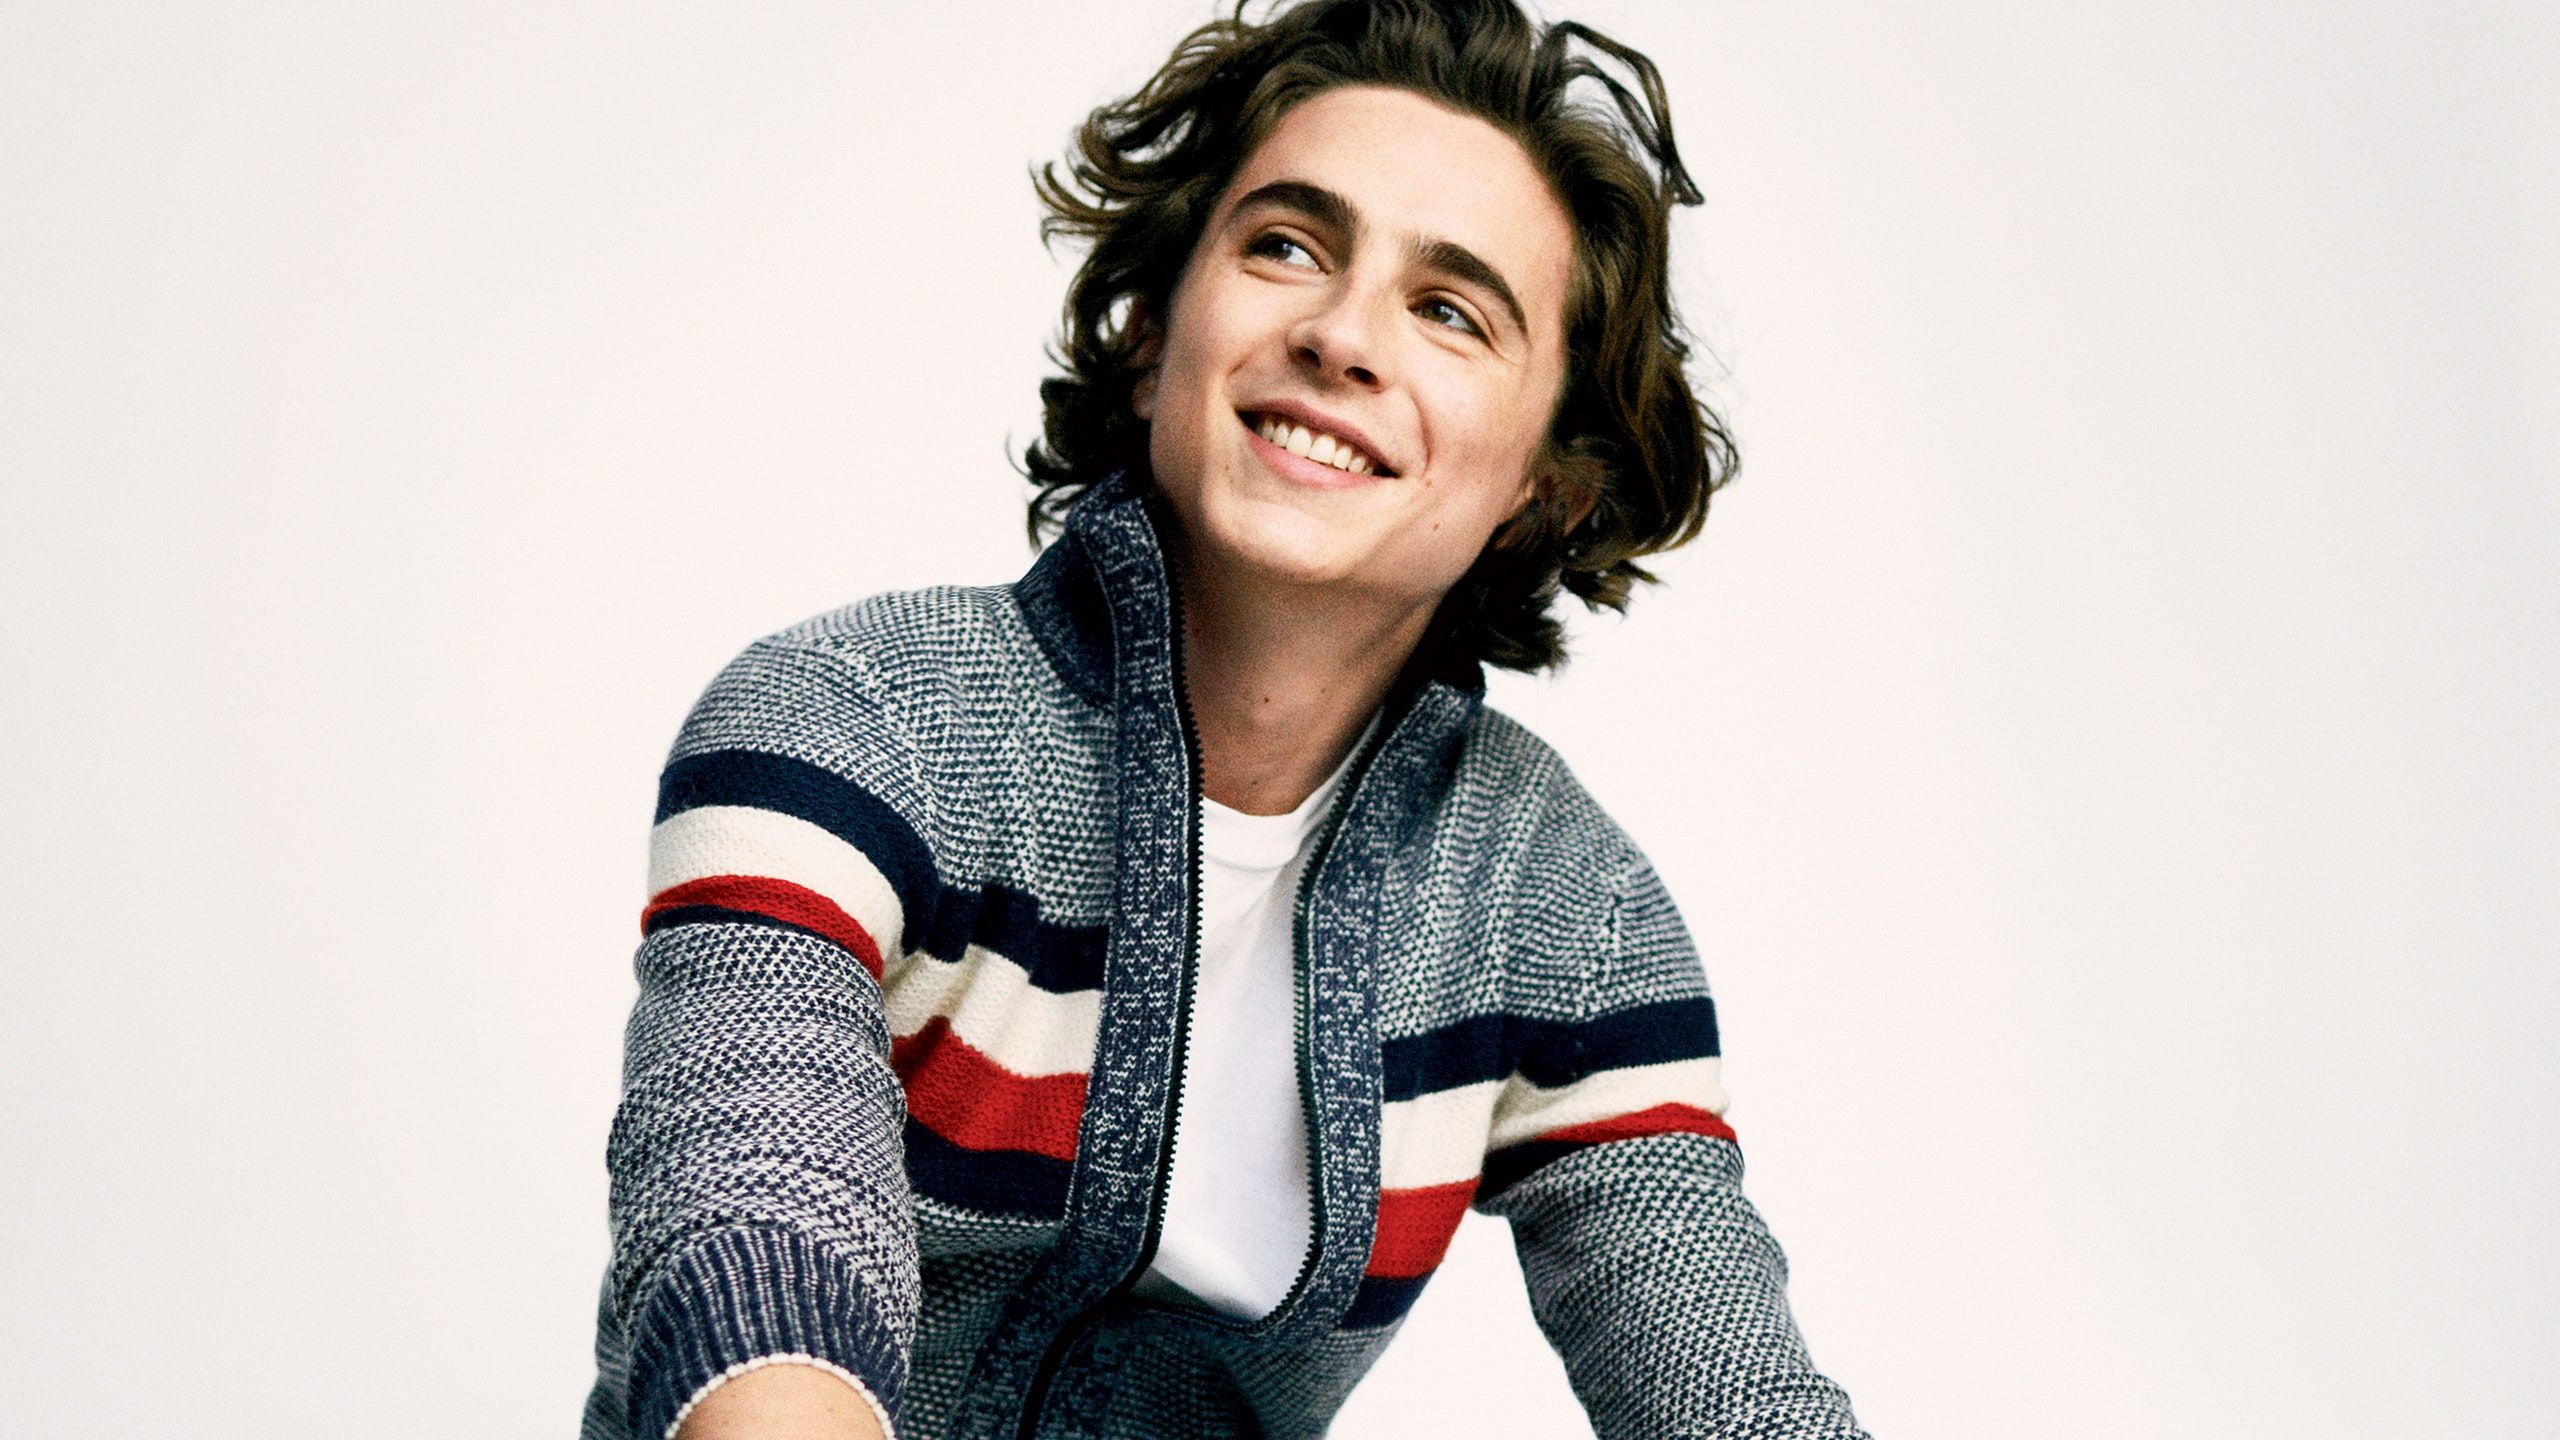 Timothe Chalamet sitting on the ground wearing a striped sweater - Timothee Chalamet